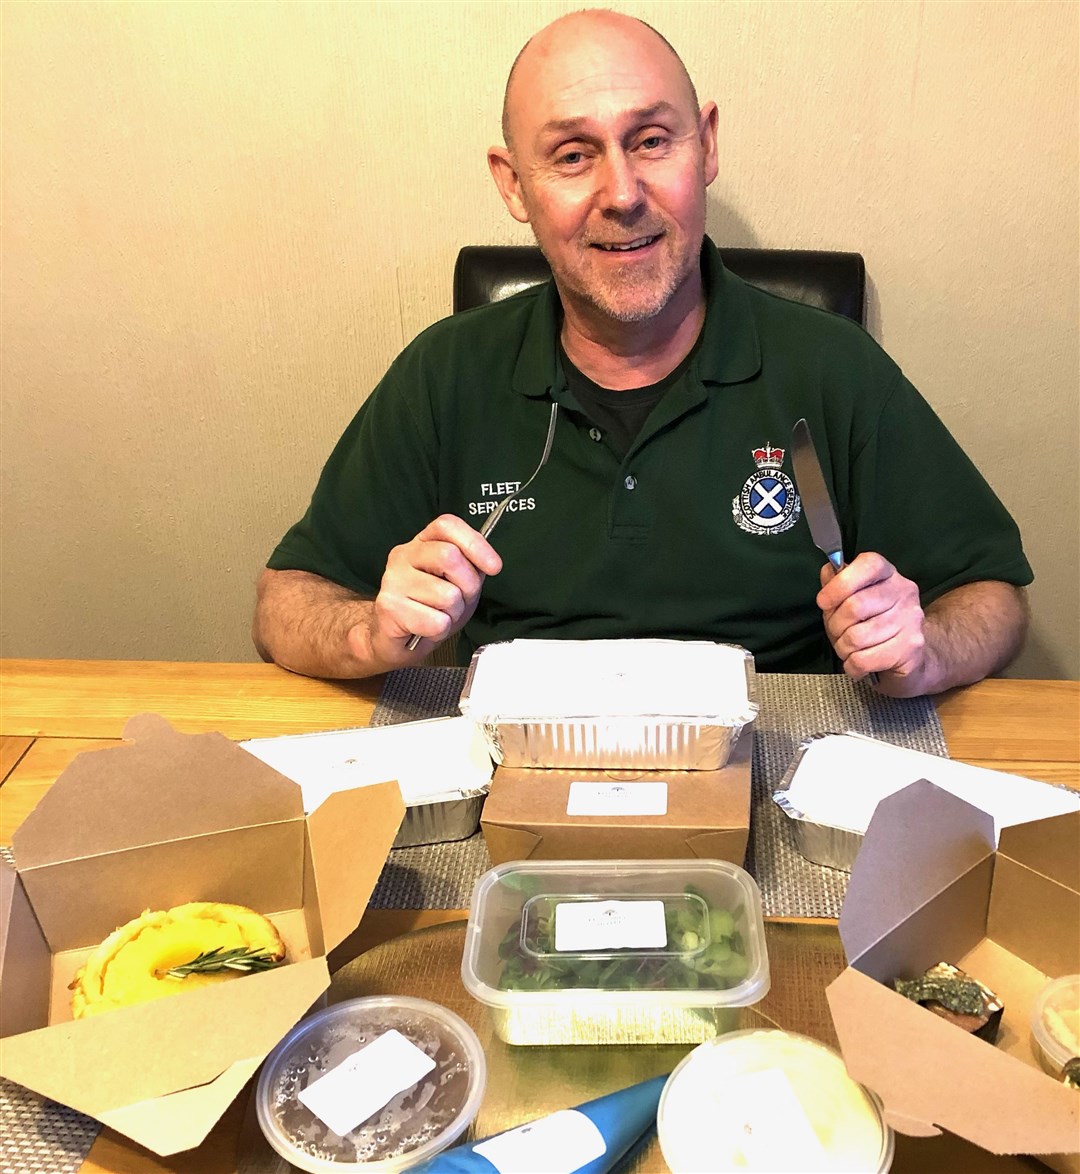 Gary Mitchell of the Scottish Ambulance Service was delighted to receive his meal for two.